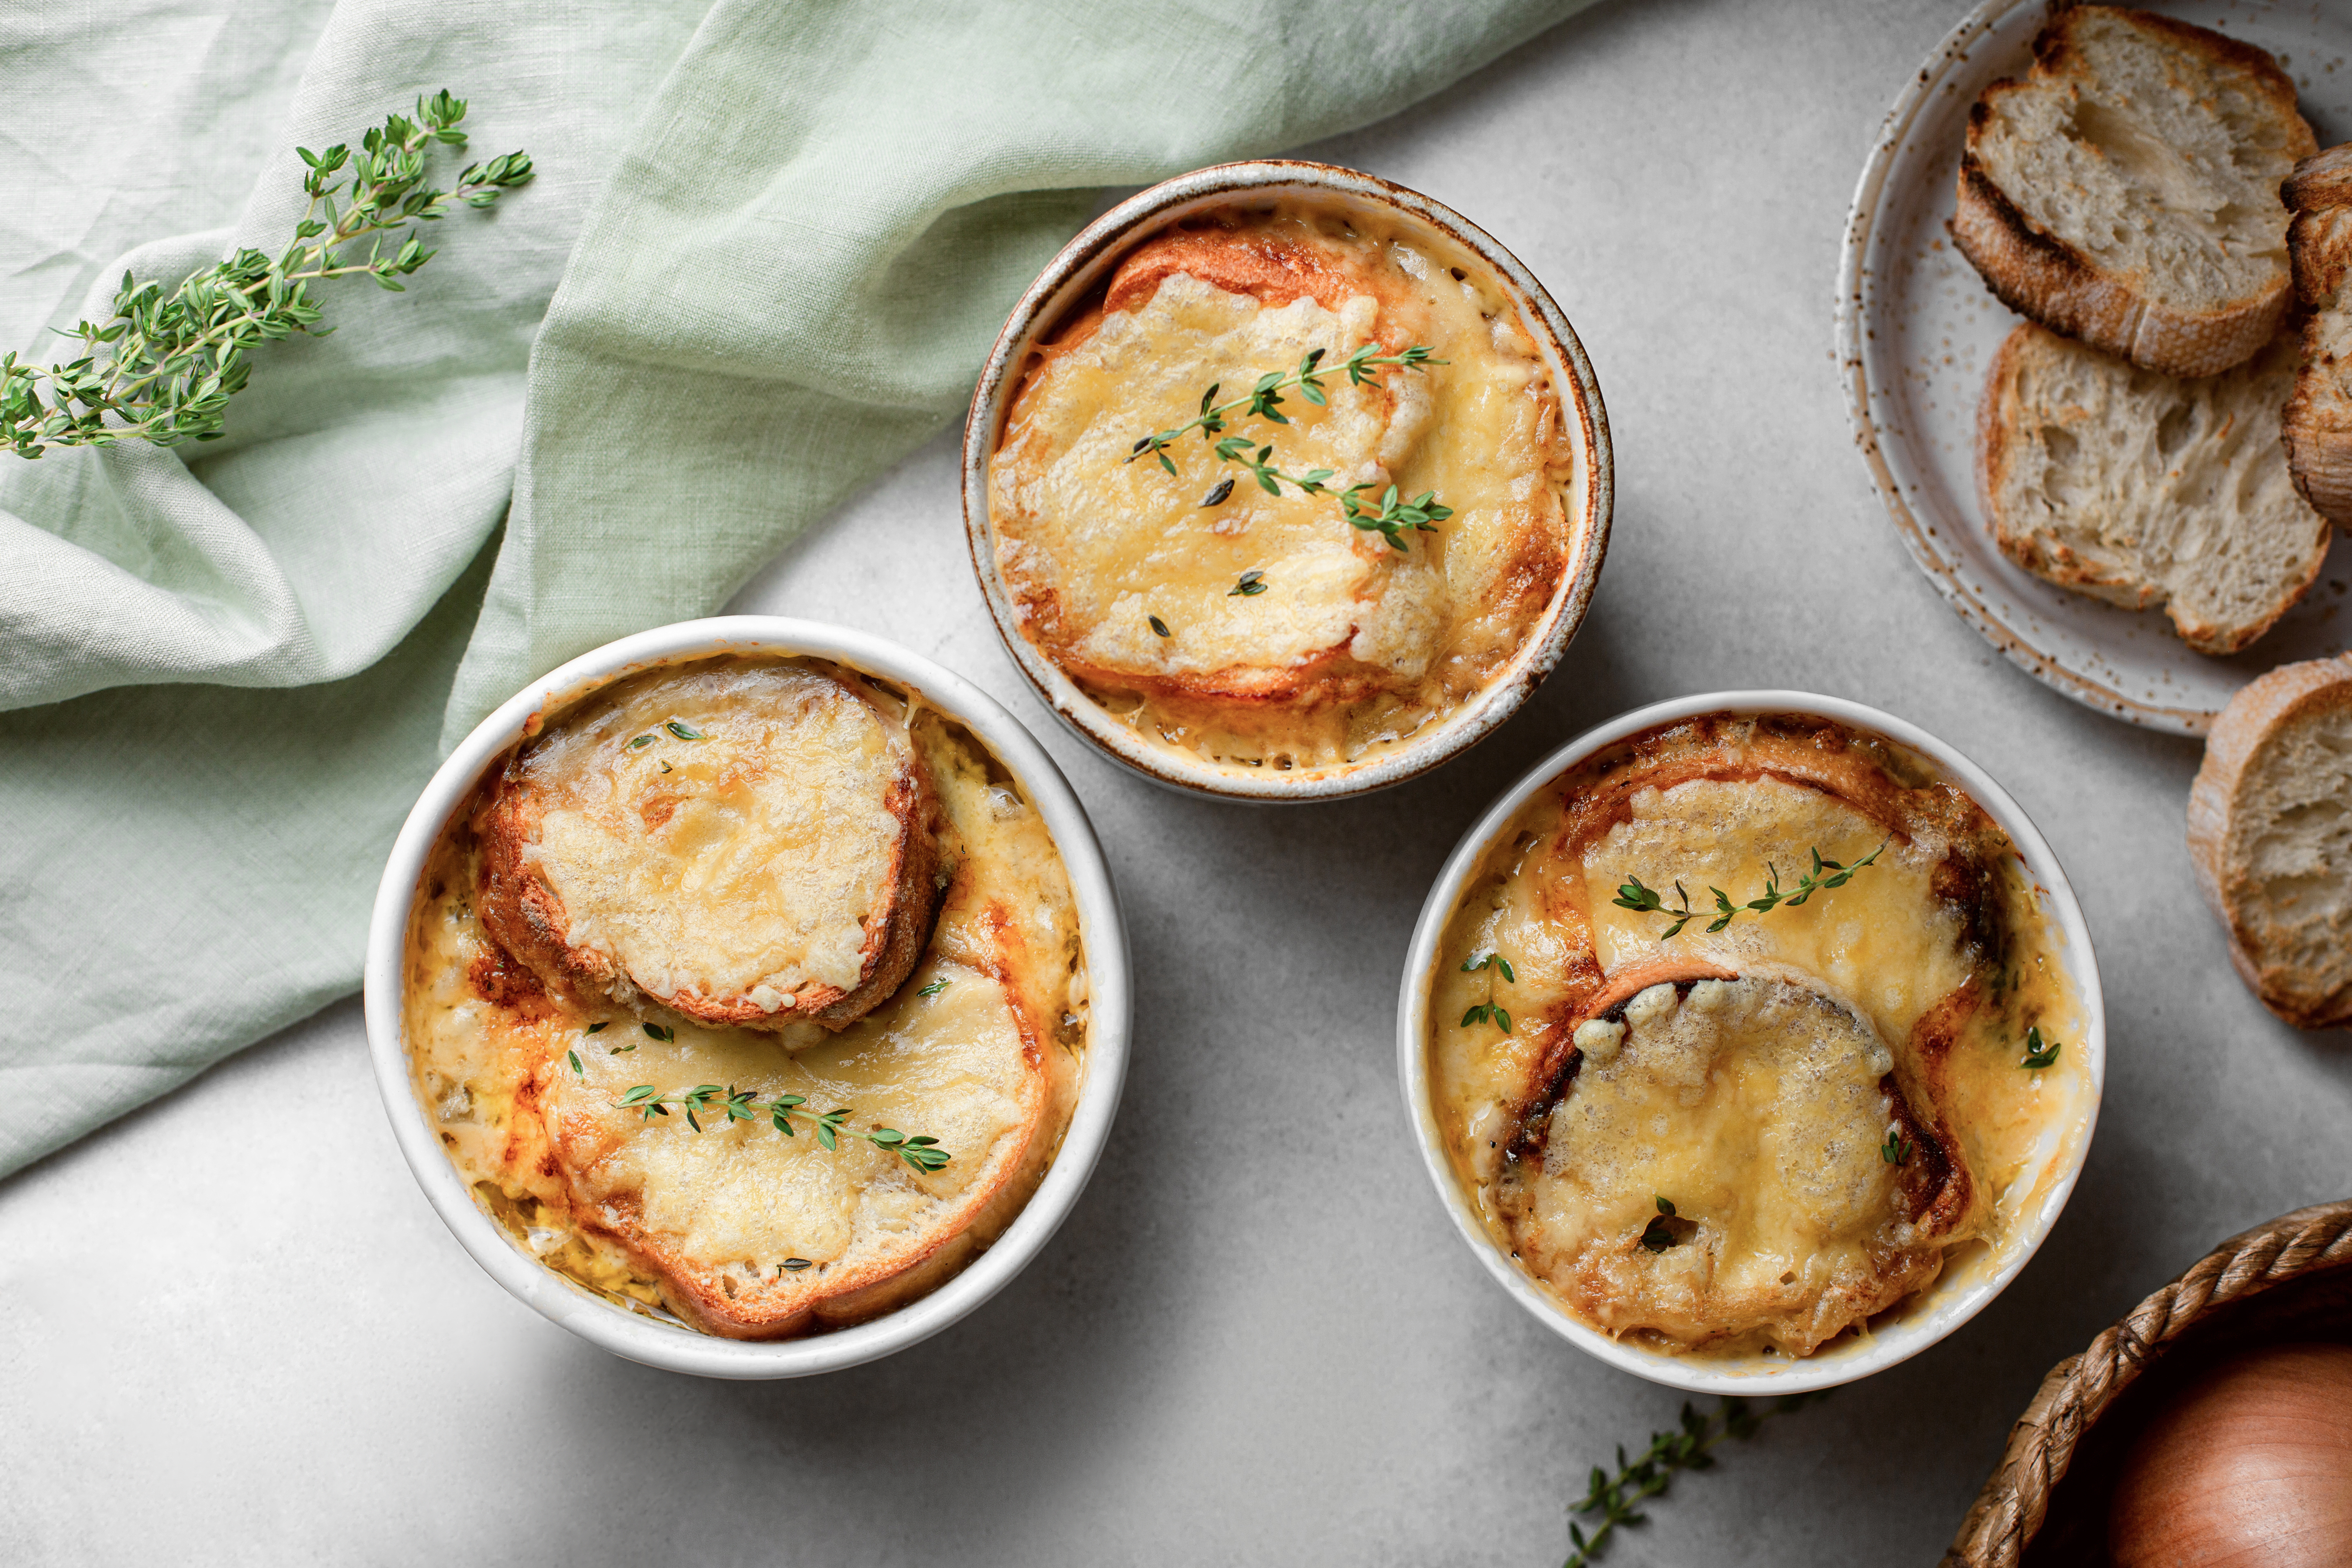 One Pot French Onion Soup - Damn Delicious